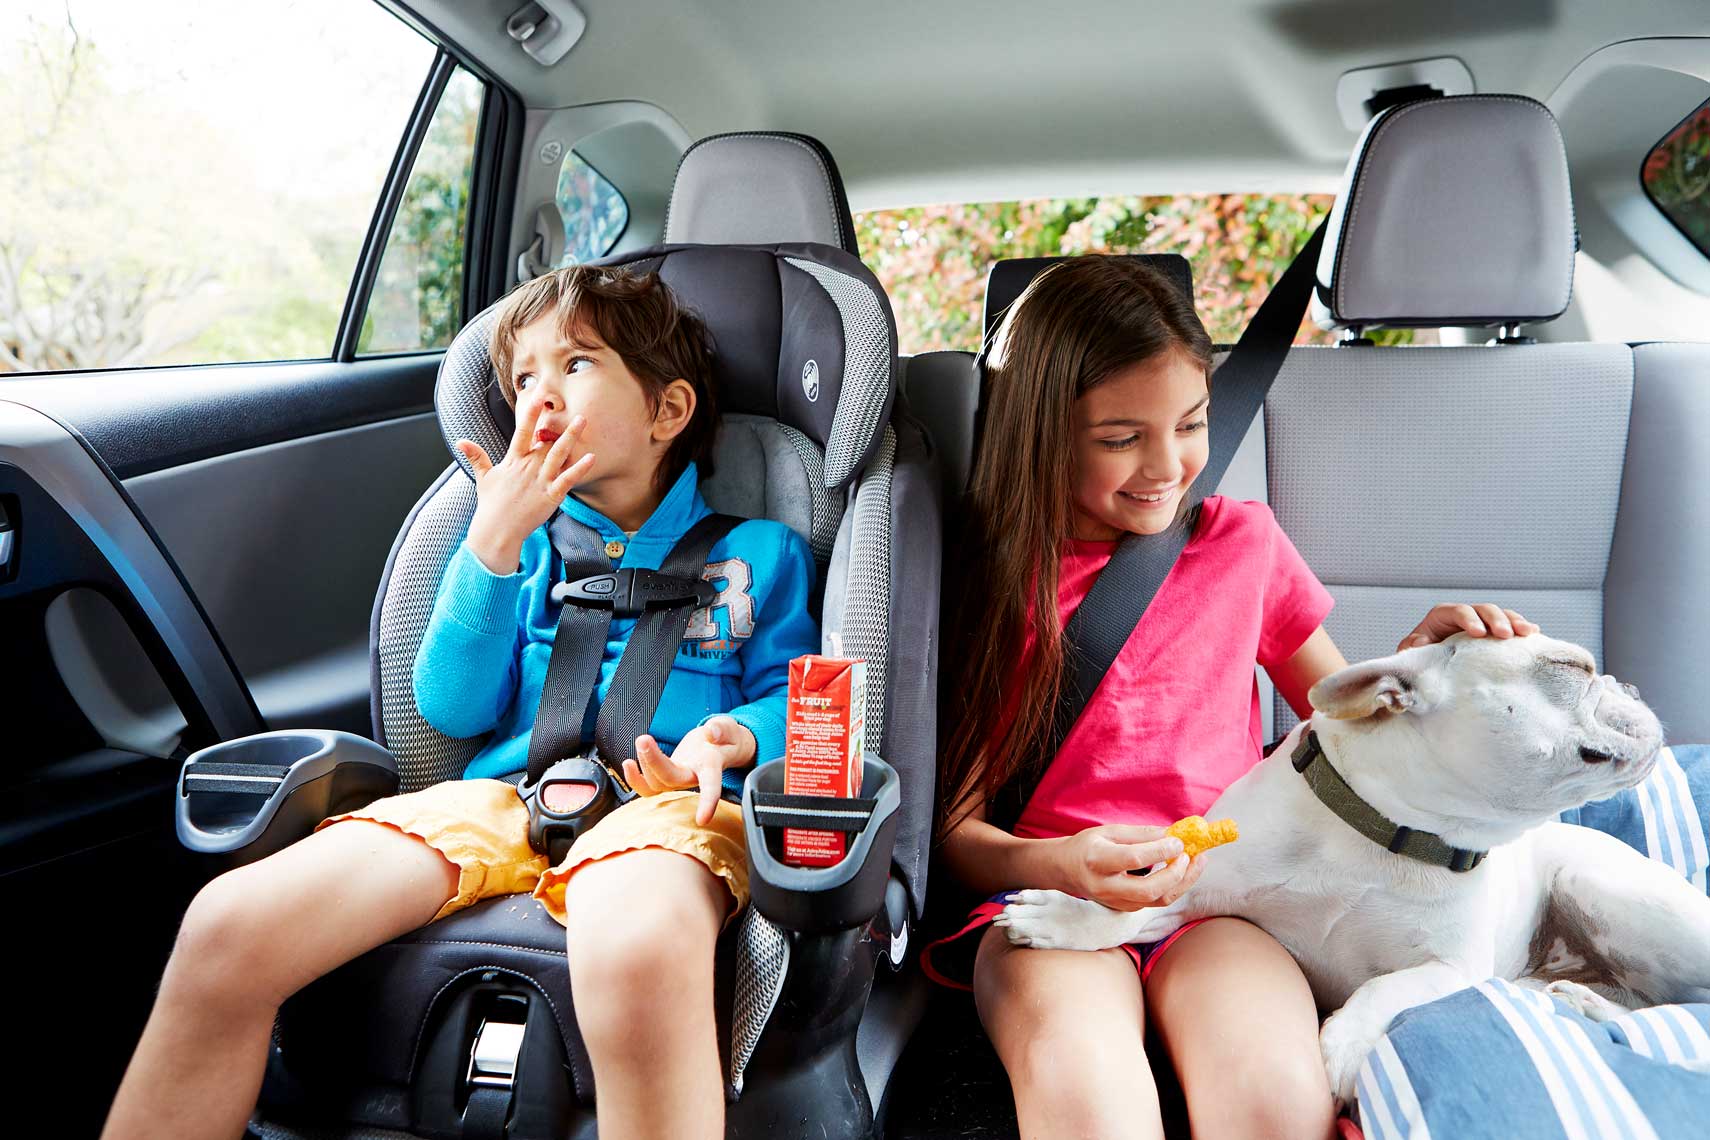 Indoor lifestyle photograph of two children riding in the car eating a snack and petting their dog.